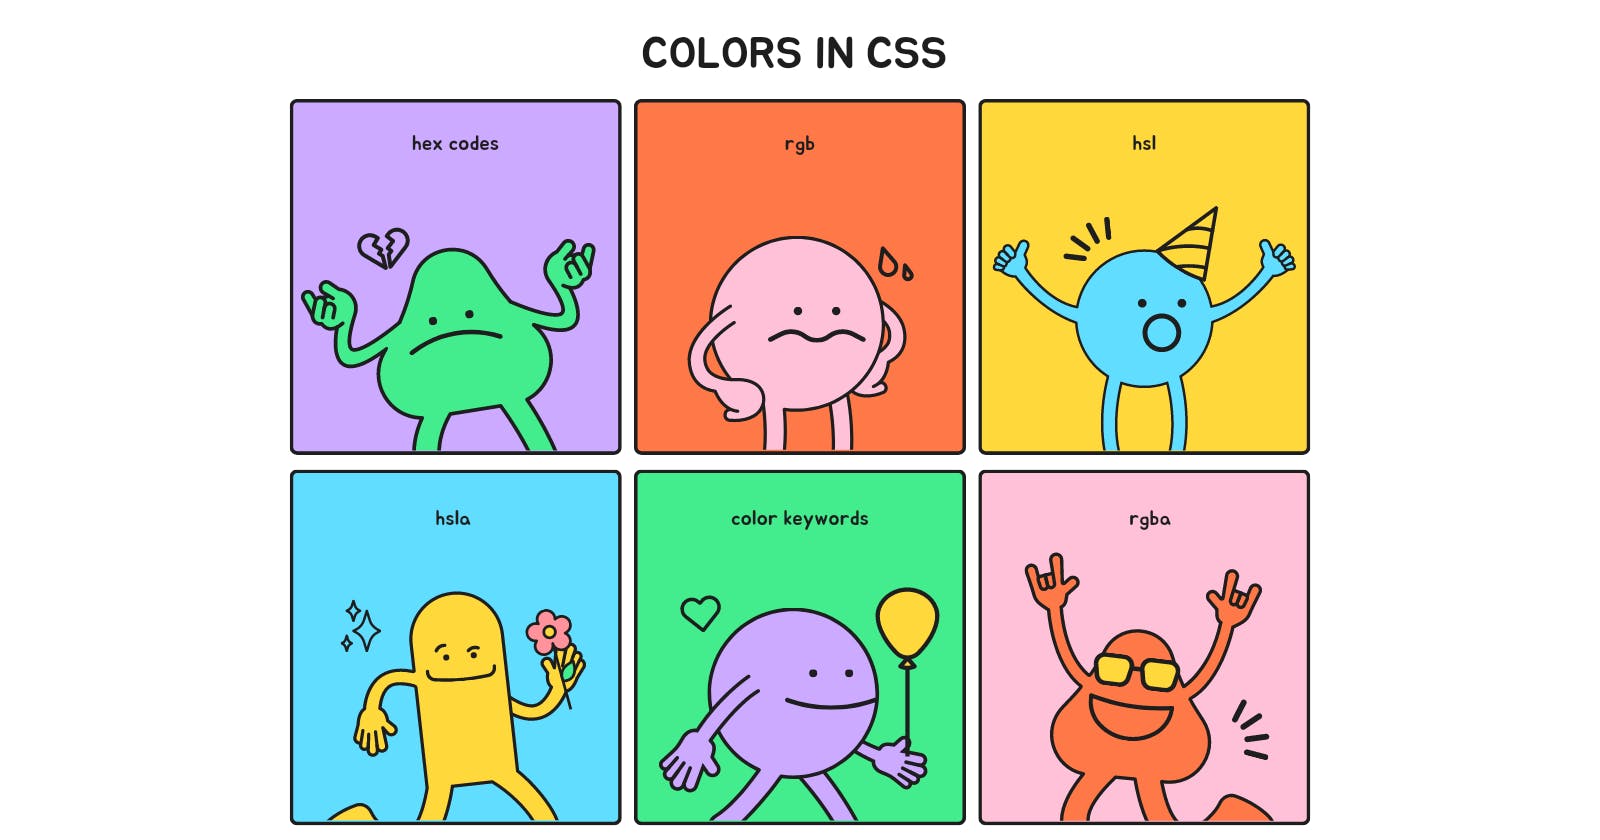 Colors in CSS